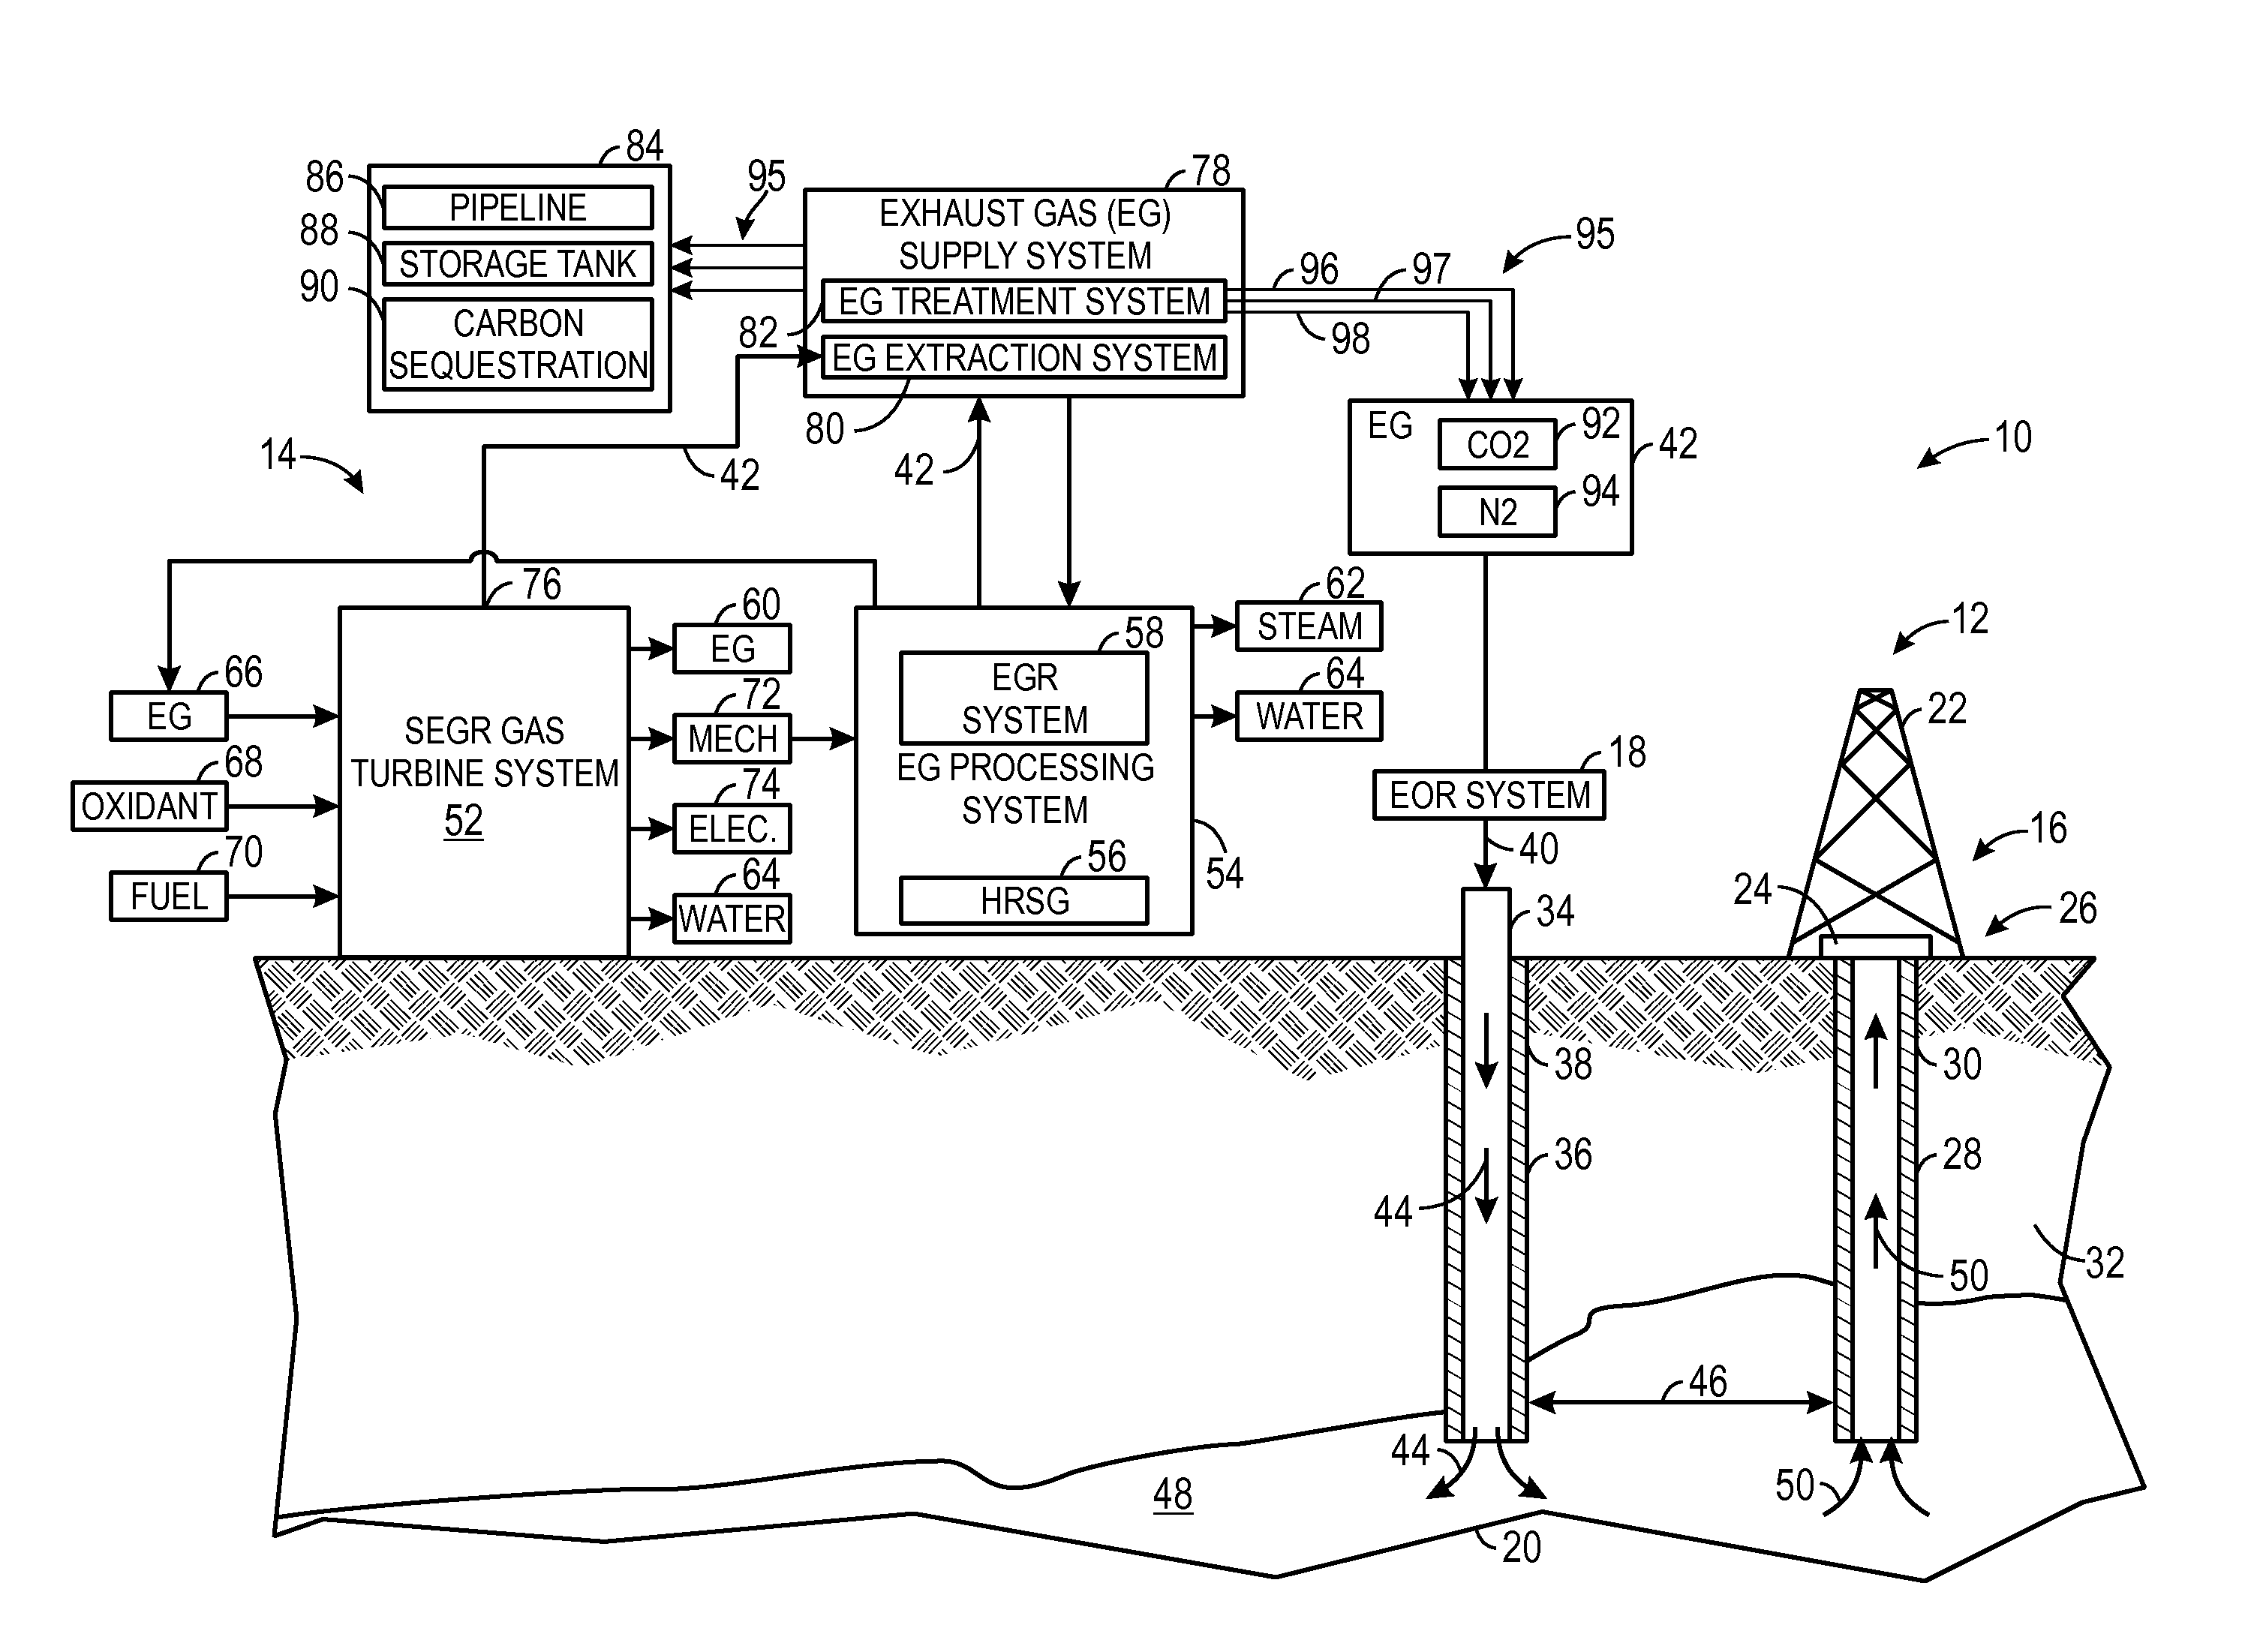 System and method for load control with diffusion combustion in a stoichiometric exhaust gas recirculation gas turbine system